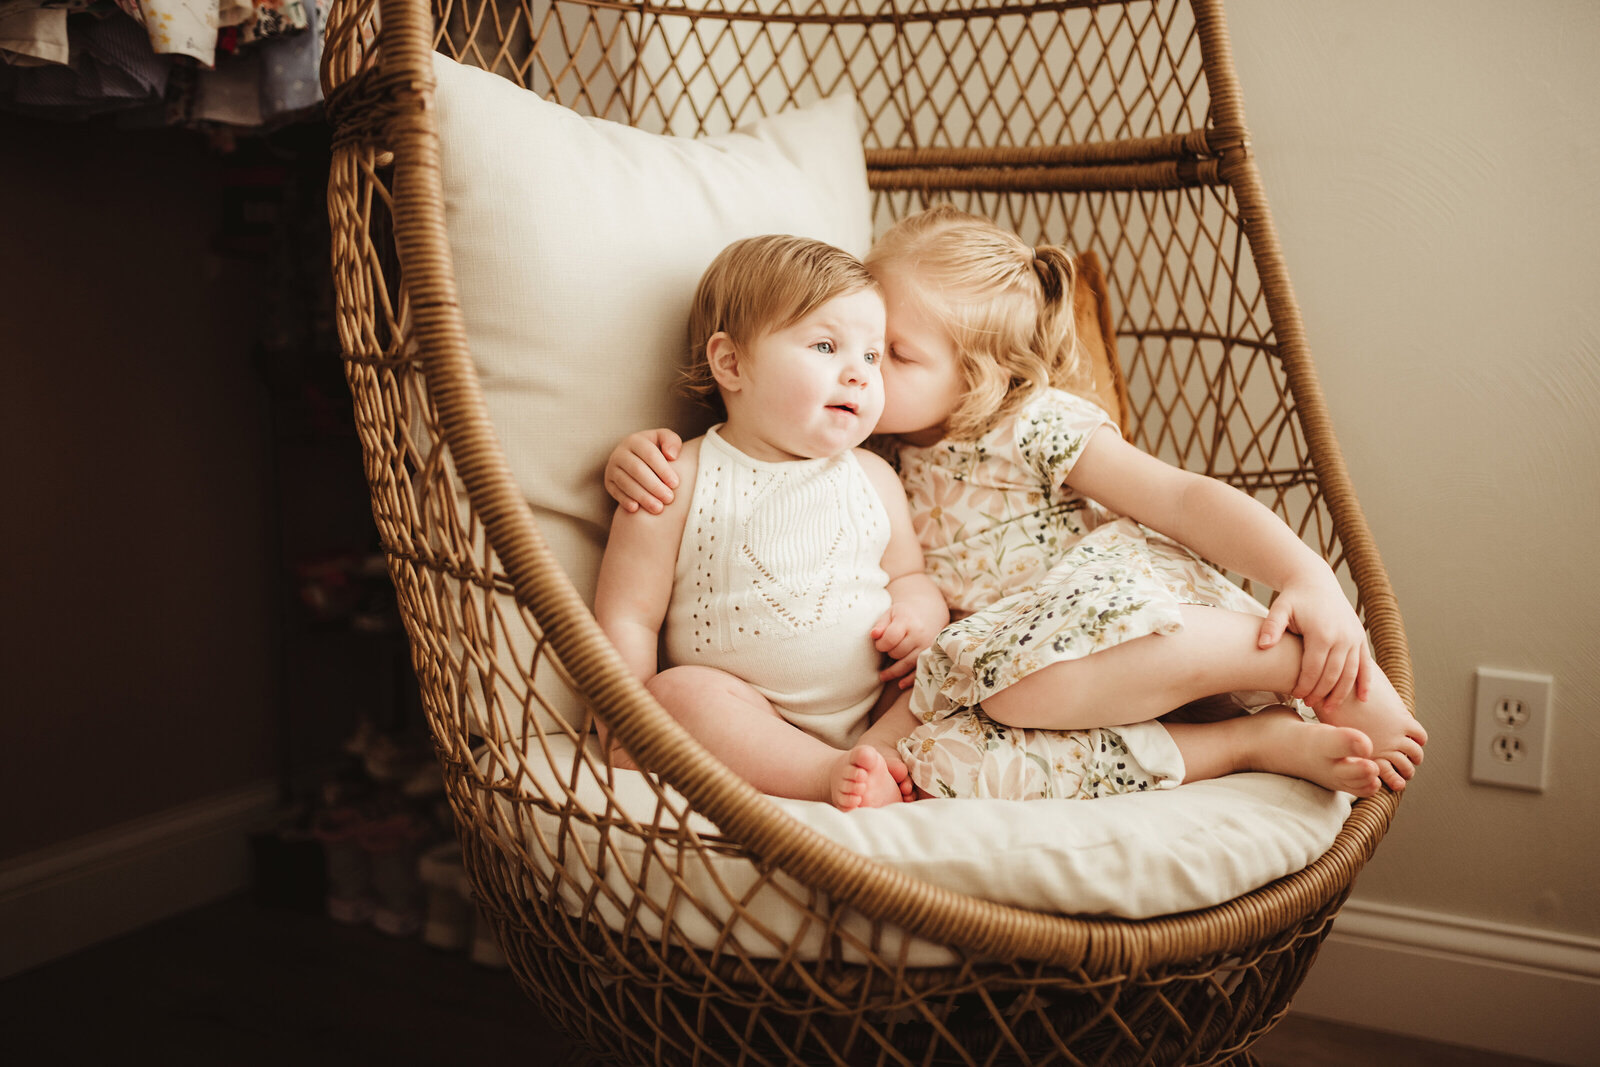 Two little girls sitting together in a wicker chair.